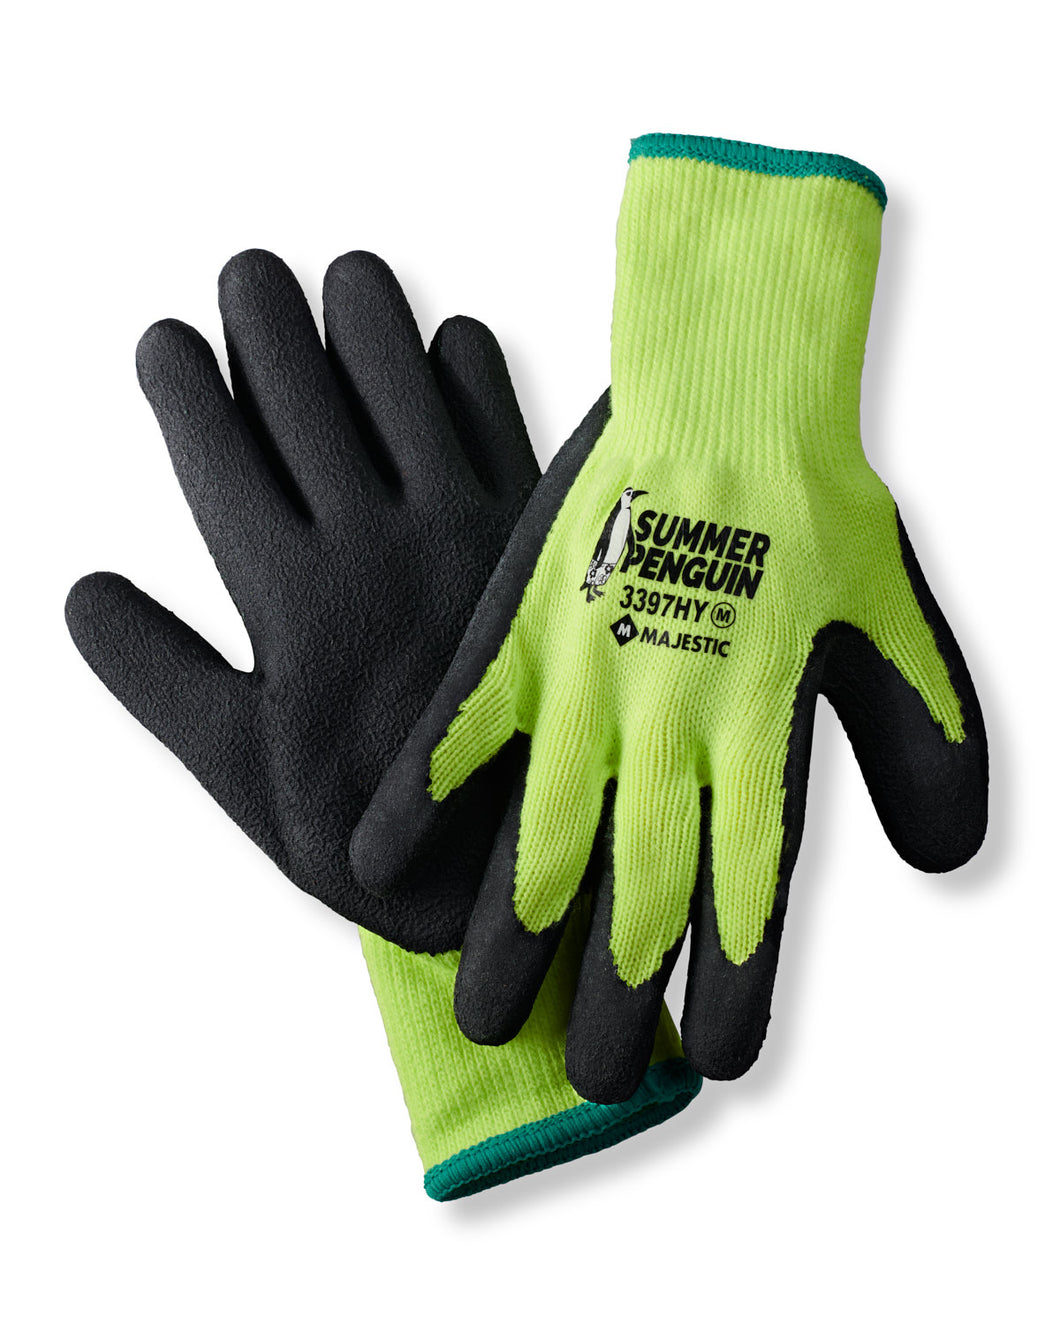 Summer Penguin Gloves Hi-Visibility Yellow 12 Pair Pack